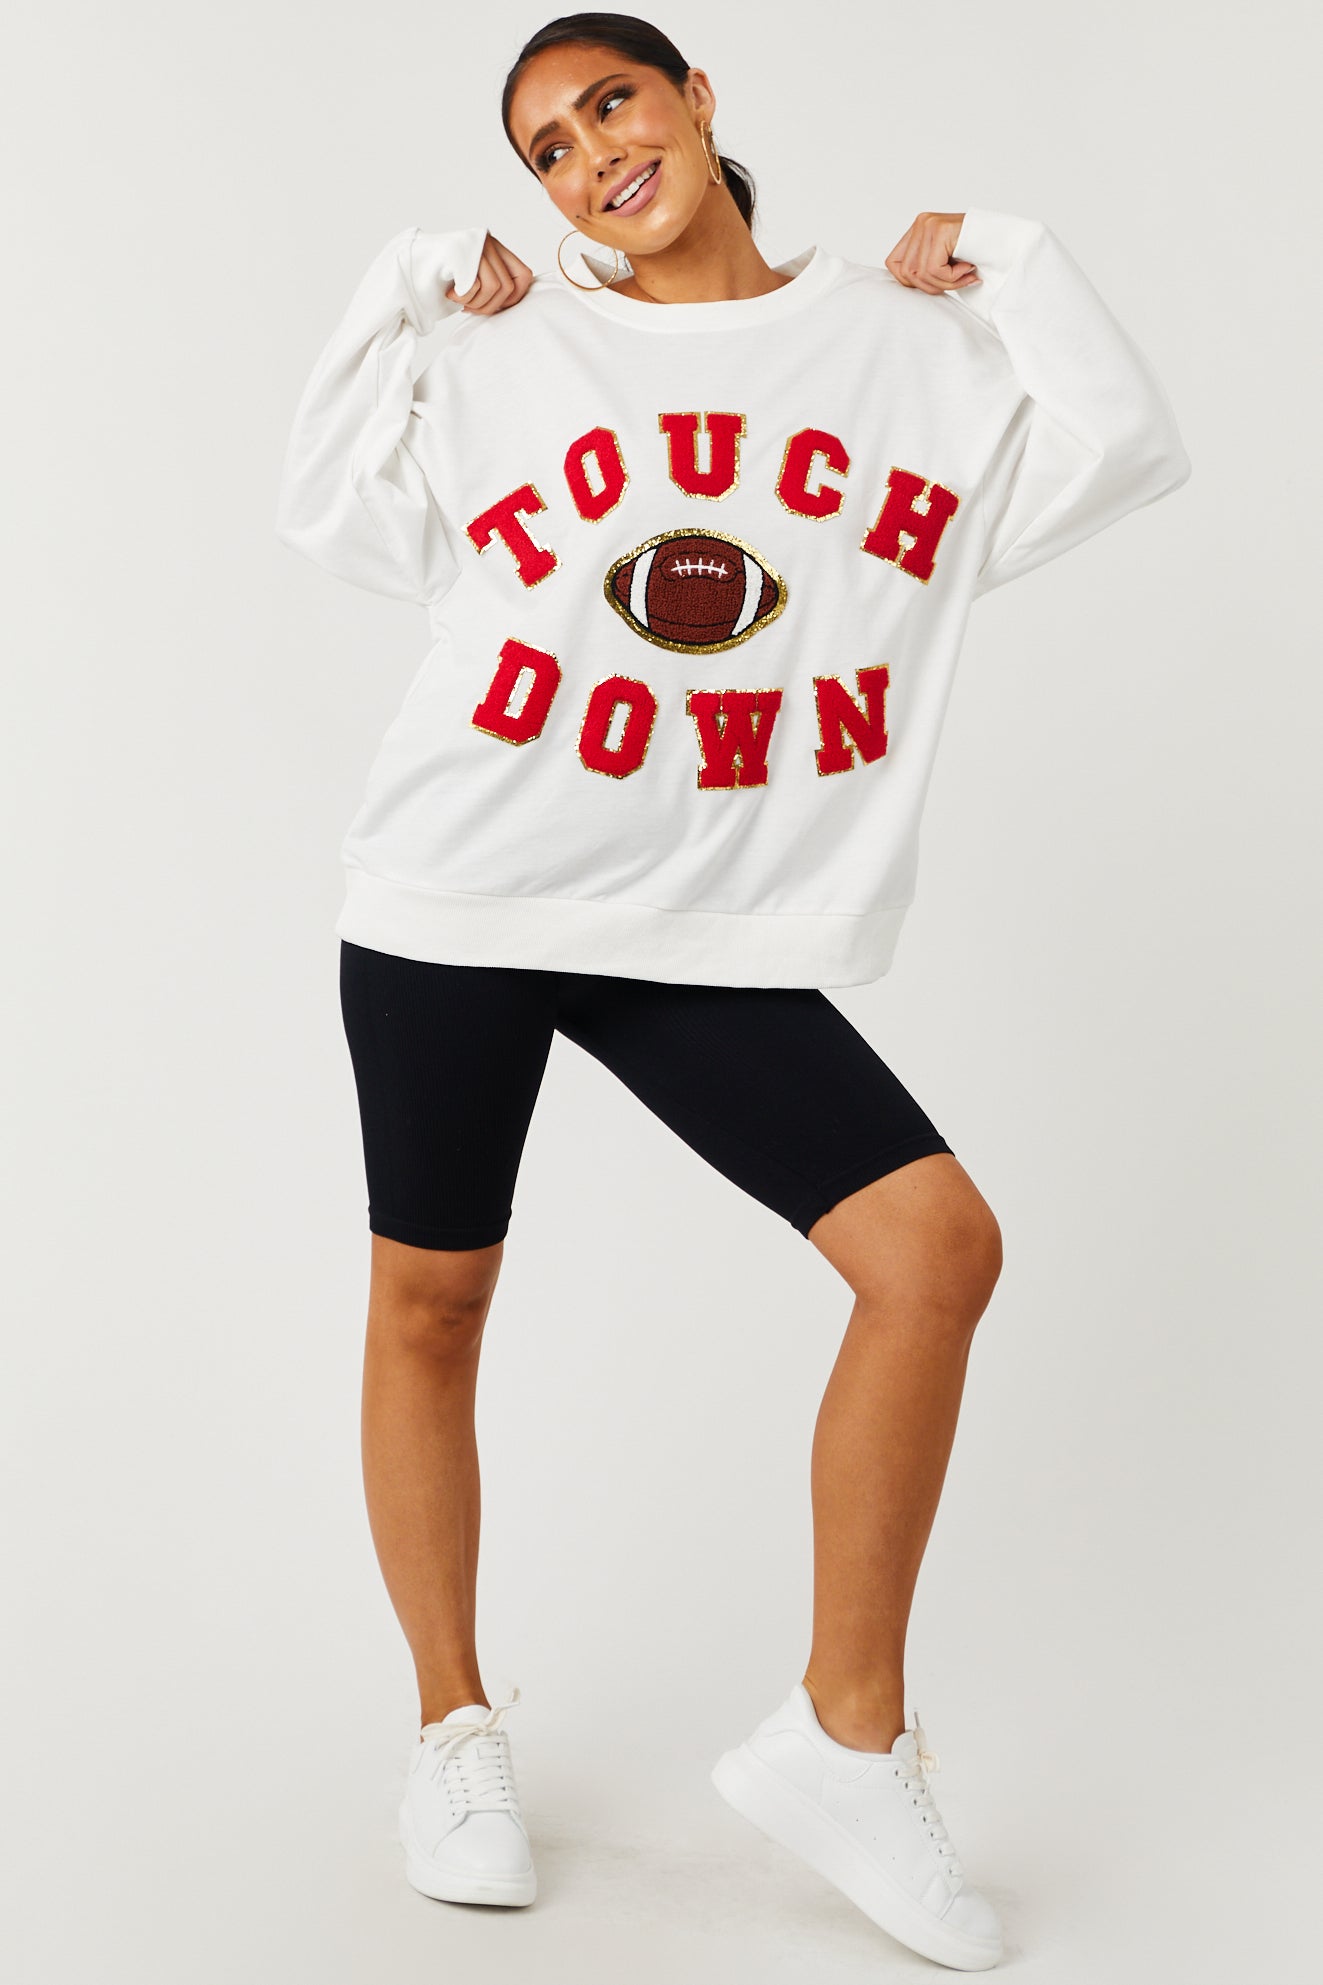 Off White and Red 'Touchdown' Sweater